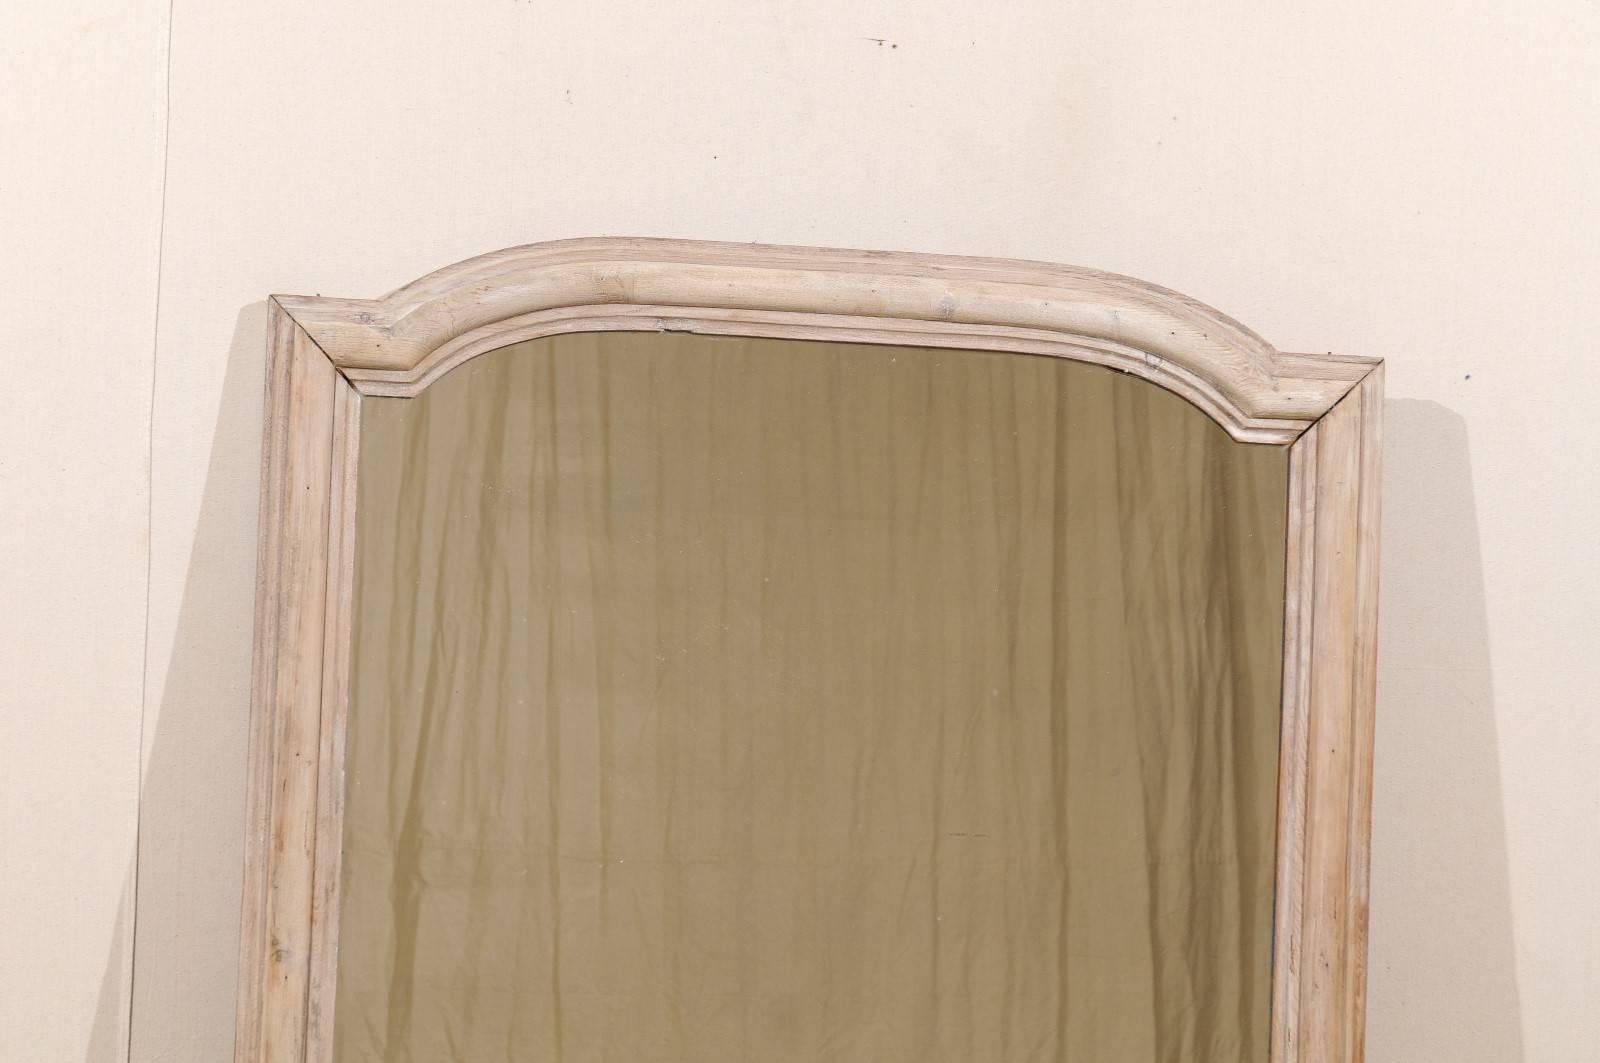 Pair of French Wood Mirrors Featuring an Arched Crest at the Top, Washed Finish 2